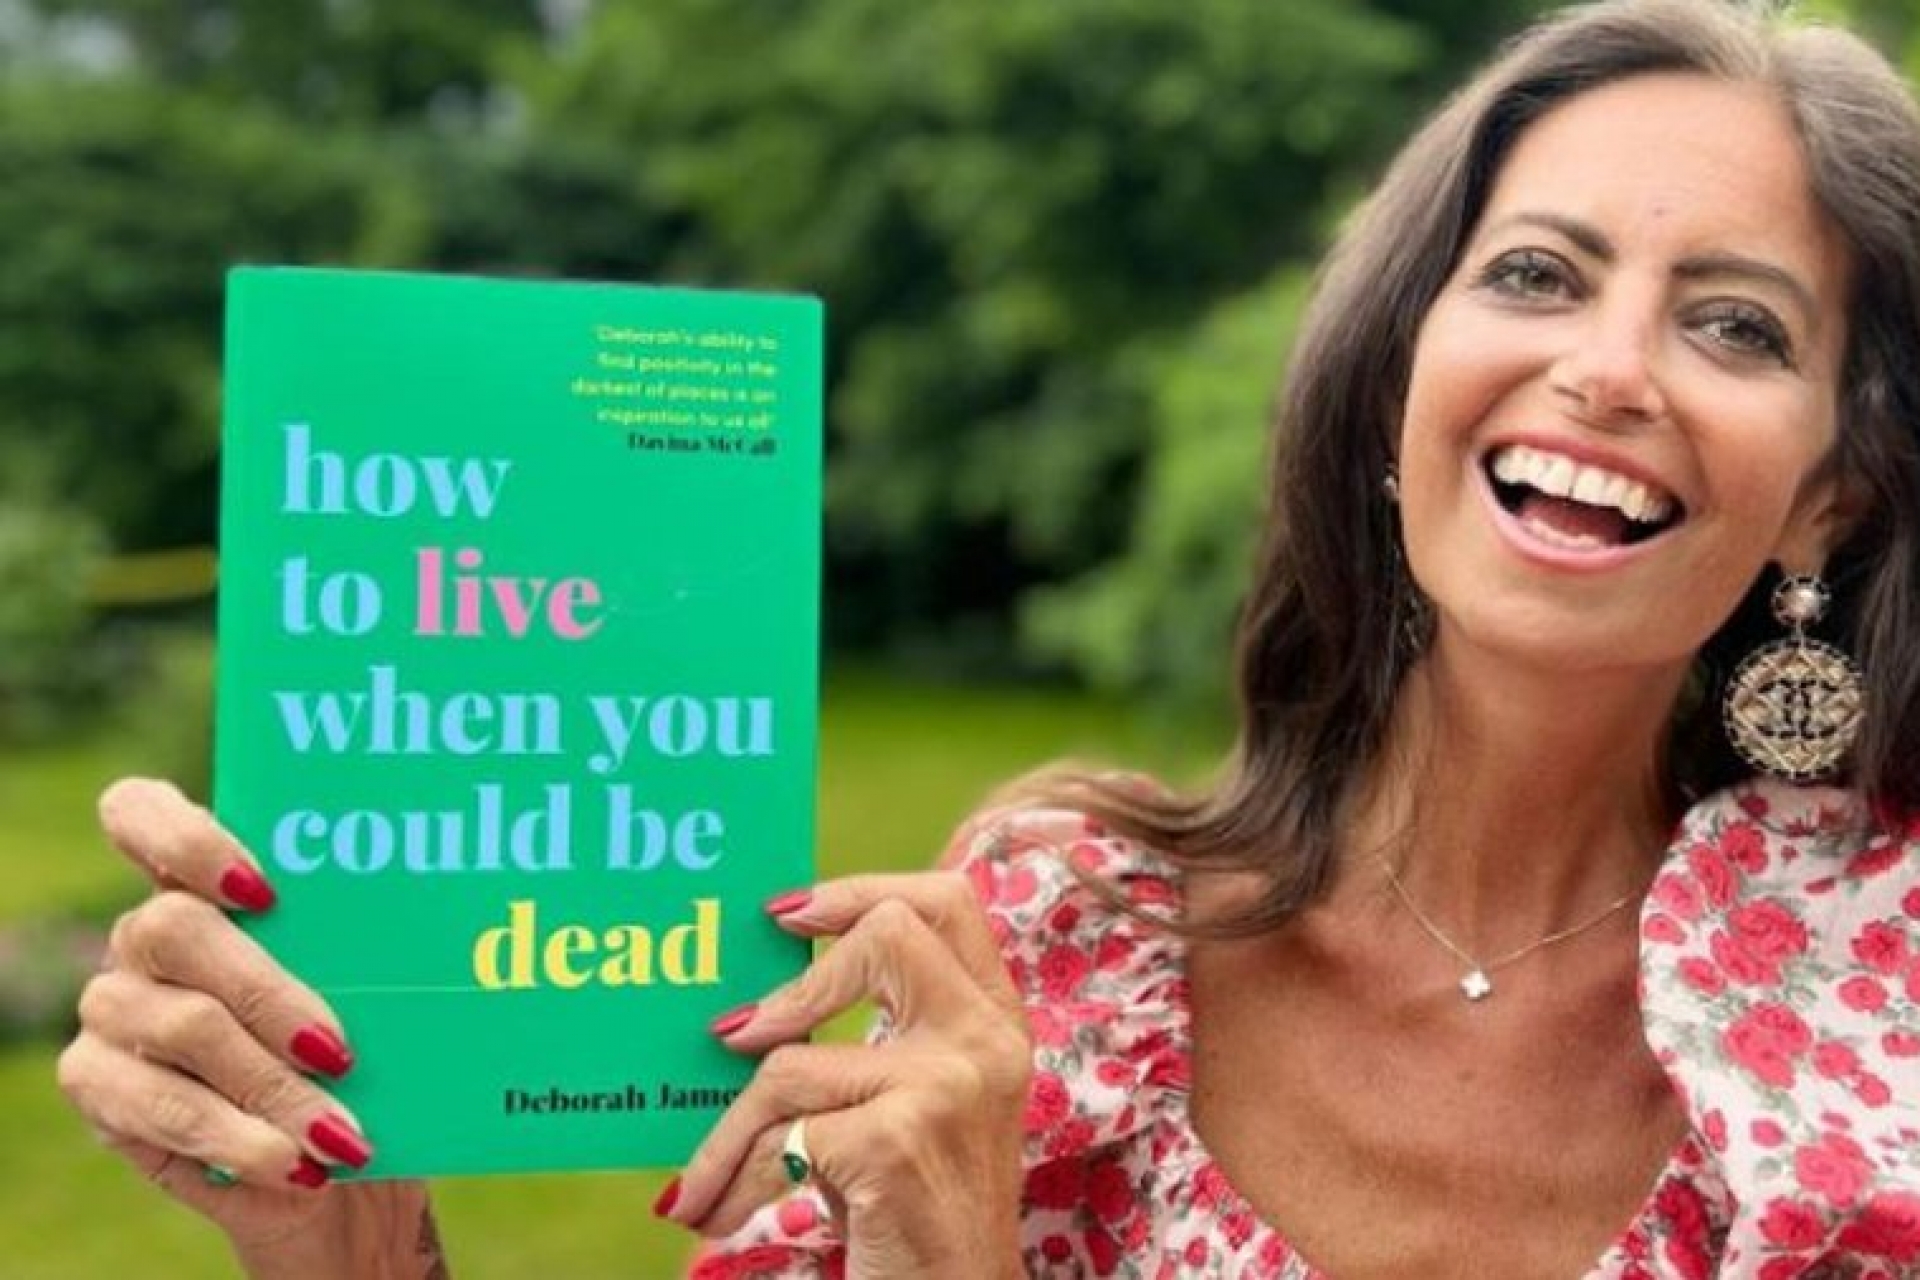 Dame Deborah James' legacy lives on with the publication of her posthumous book How To Live When You Could Be Dead 